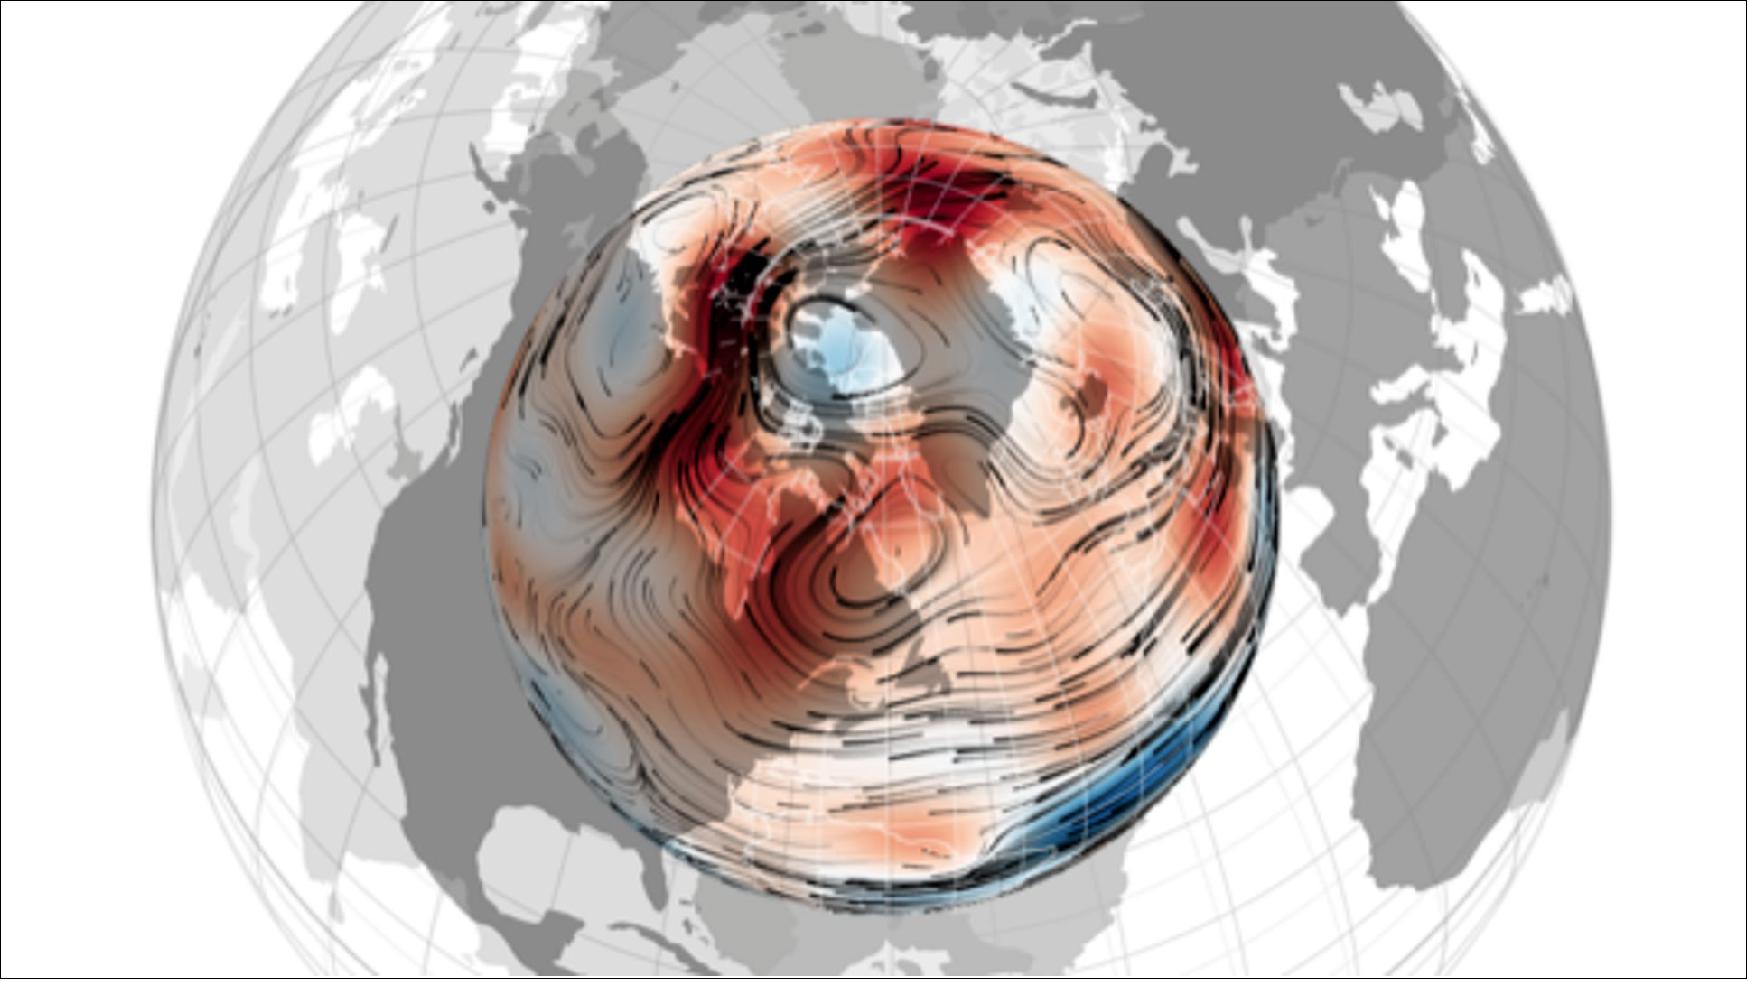 Figure 62: Swirling iron. Changes in the flow of molten material in the planet's interior have altered the strength of the above regions of negative magnetic flux. The image shows the pattern of flow in Earth’s outer core inferred by satellite data, including ESA’s Swarm mission, of the magnetic field. The image was supplied by Dr Nicolas Gillet from the University of Grenoble. The research is partially supported by the French Space Agency CNES (image credit: N. Gillet)